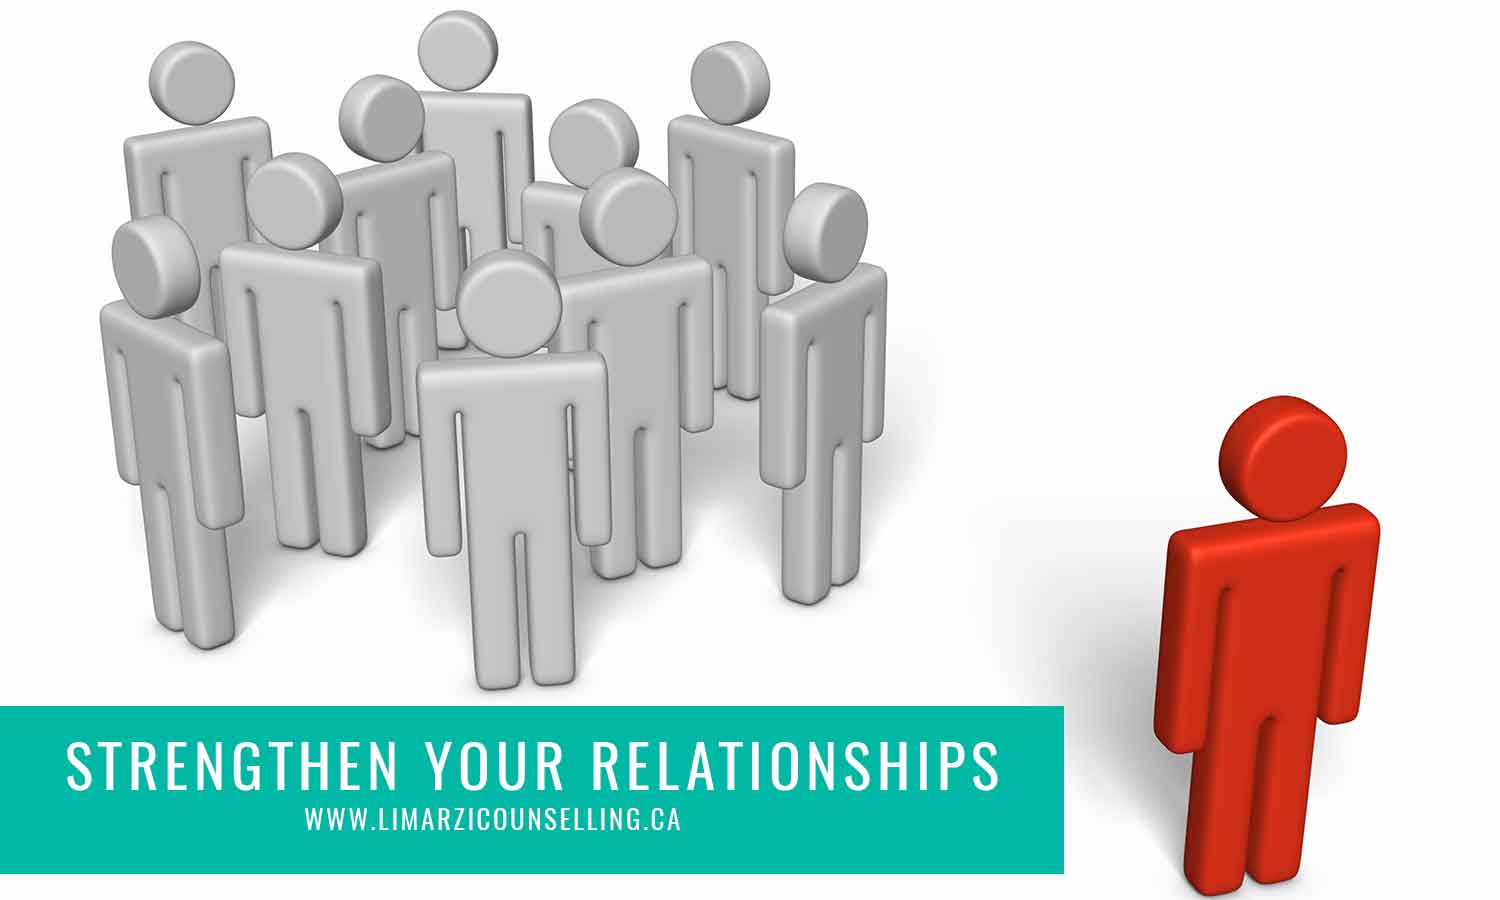 Strengthen your relationships